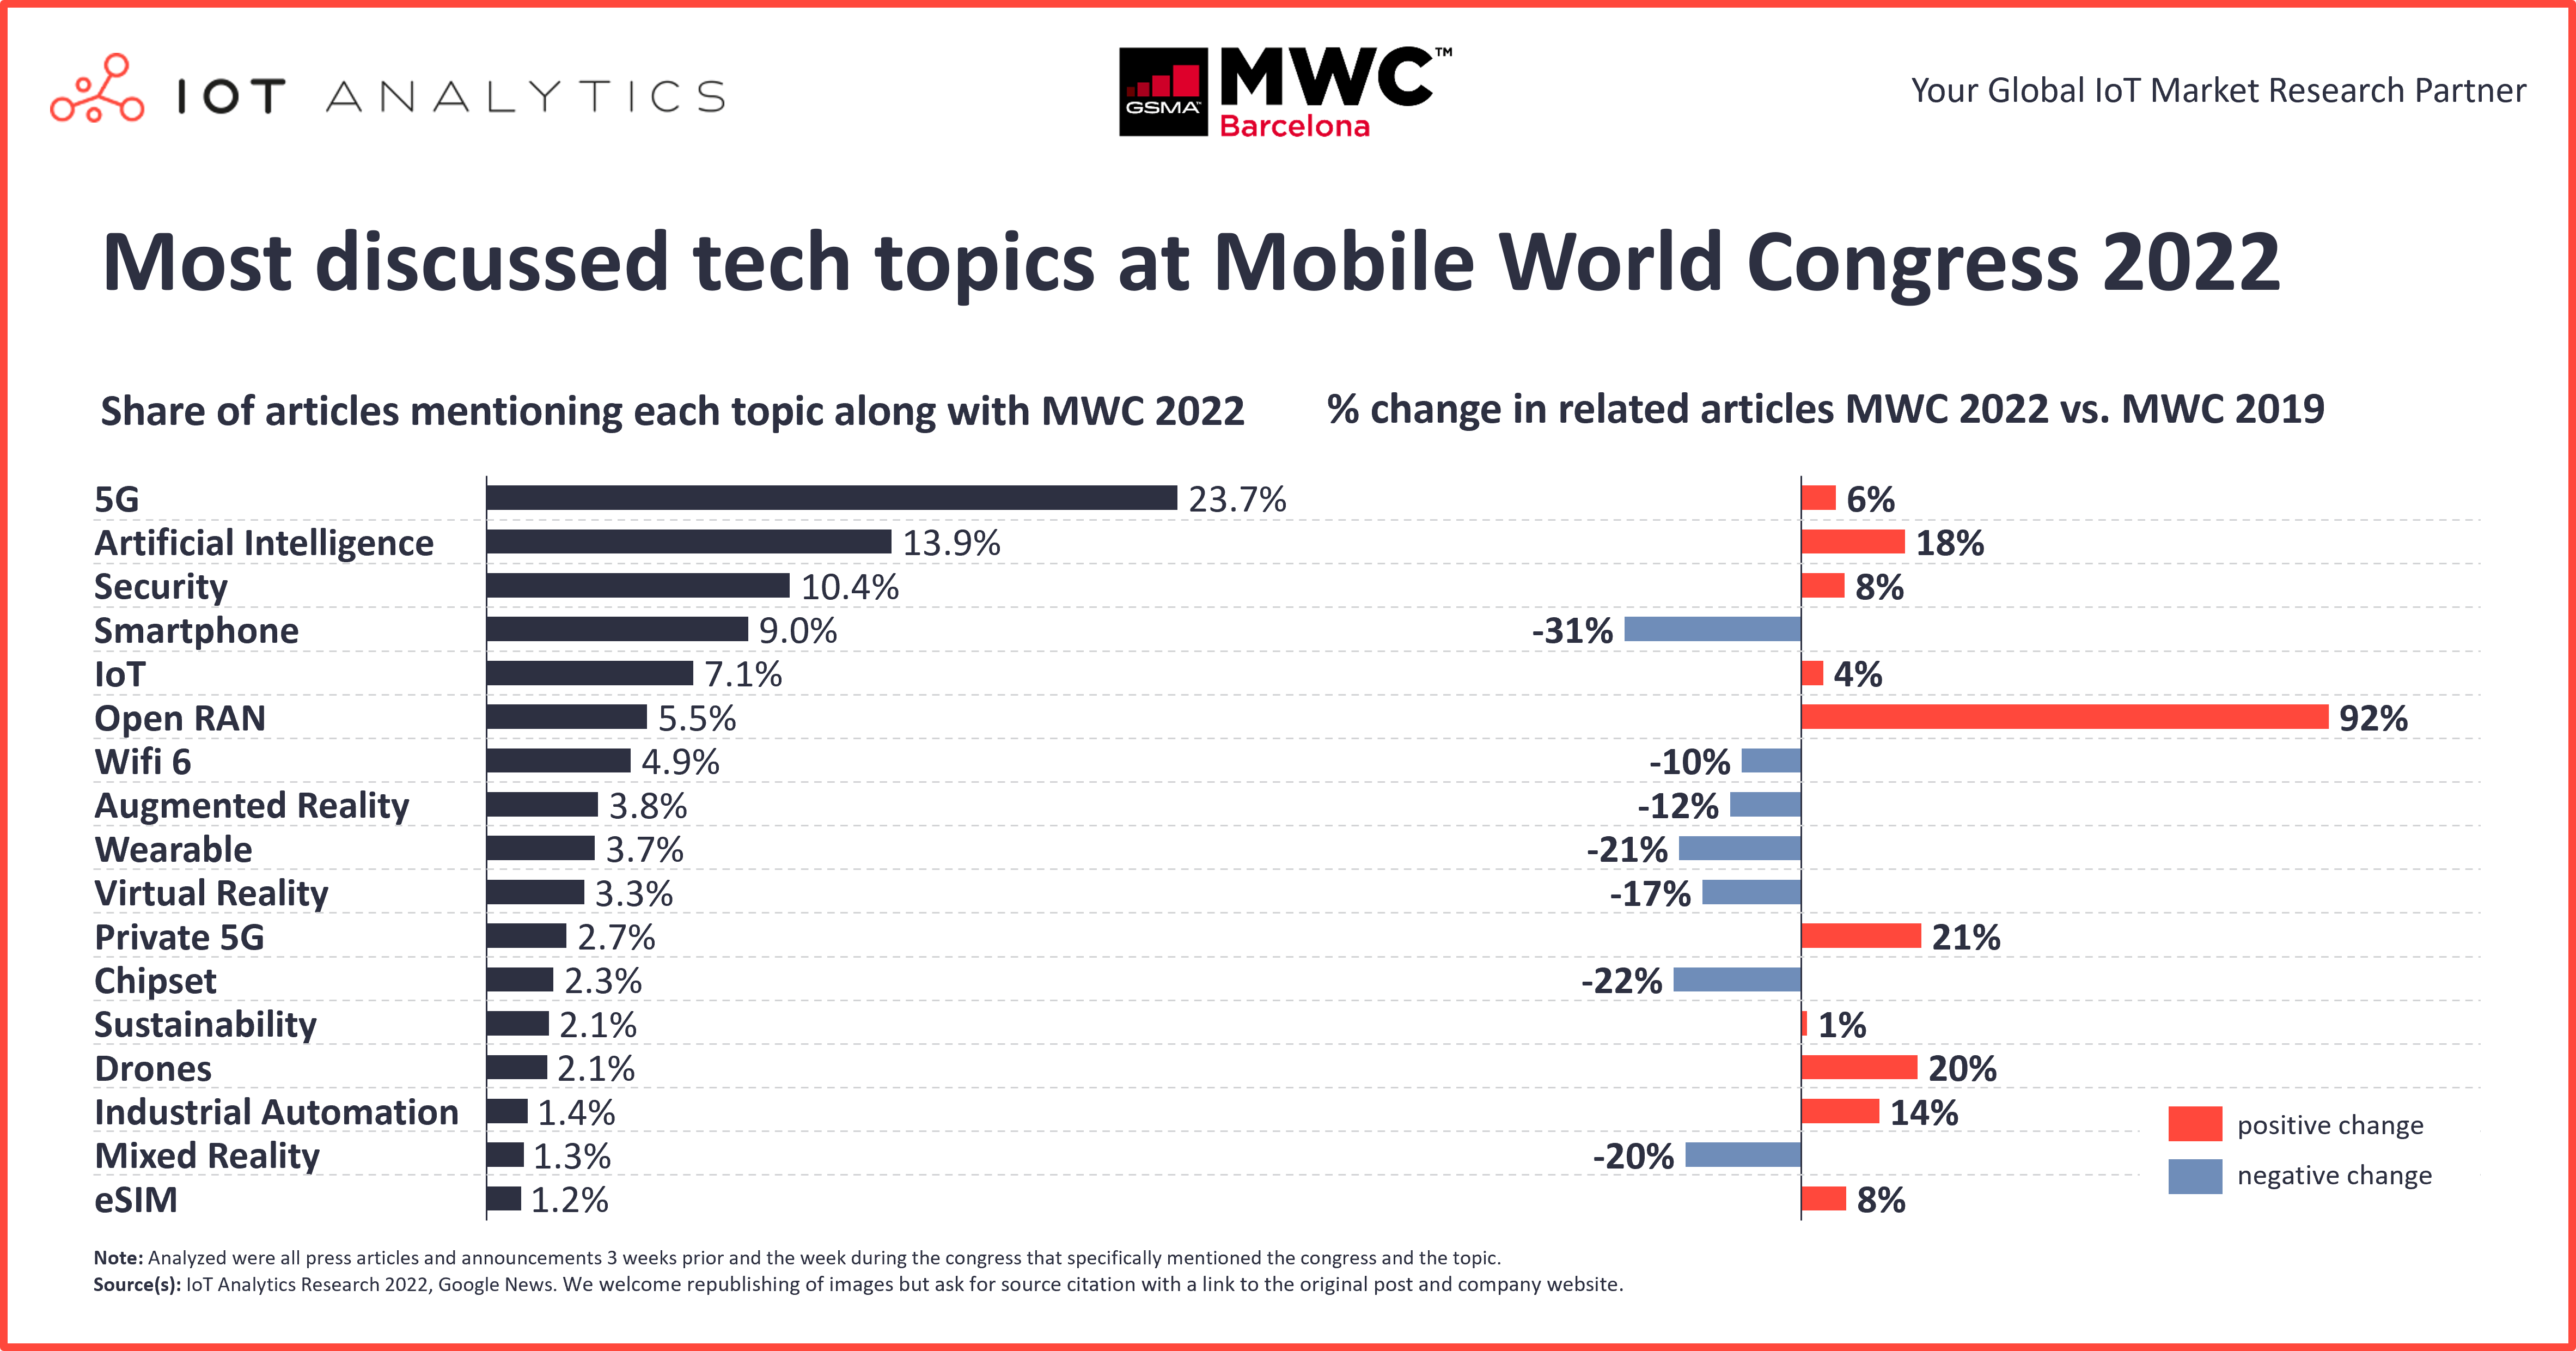 Most discussed topics at MWC 2022